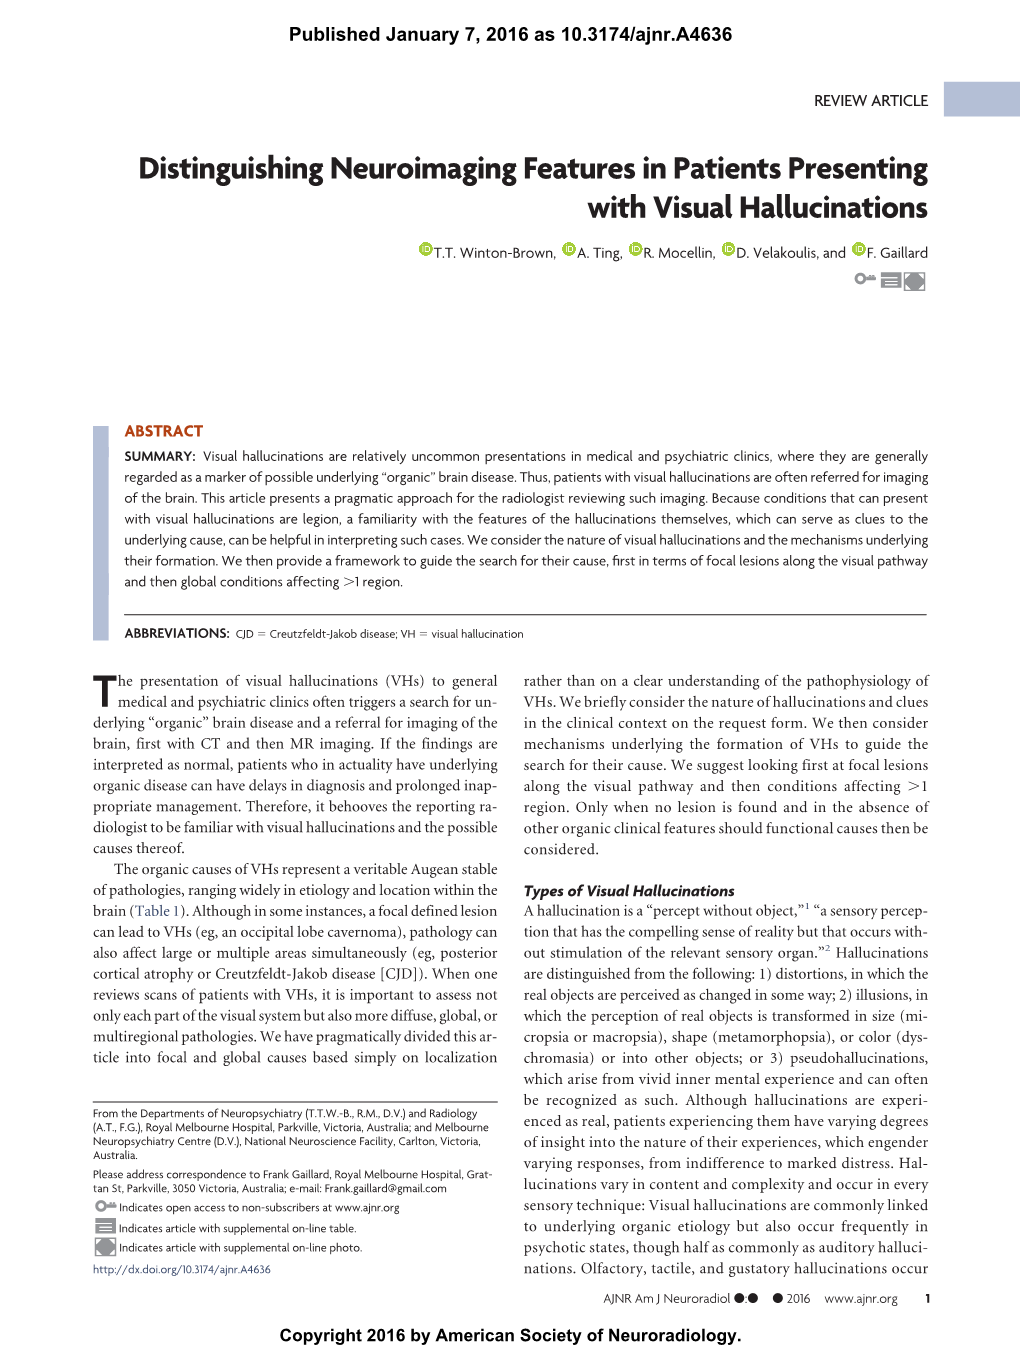 Distinguishing Neuroimaging Features in Patients Presenting with Visual Hallucinations